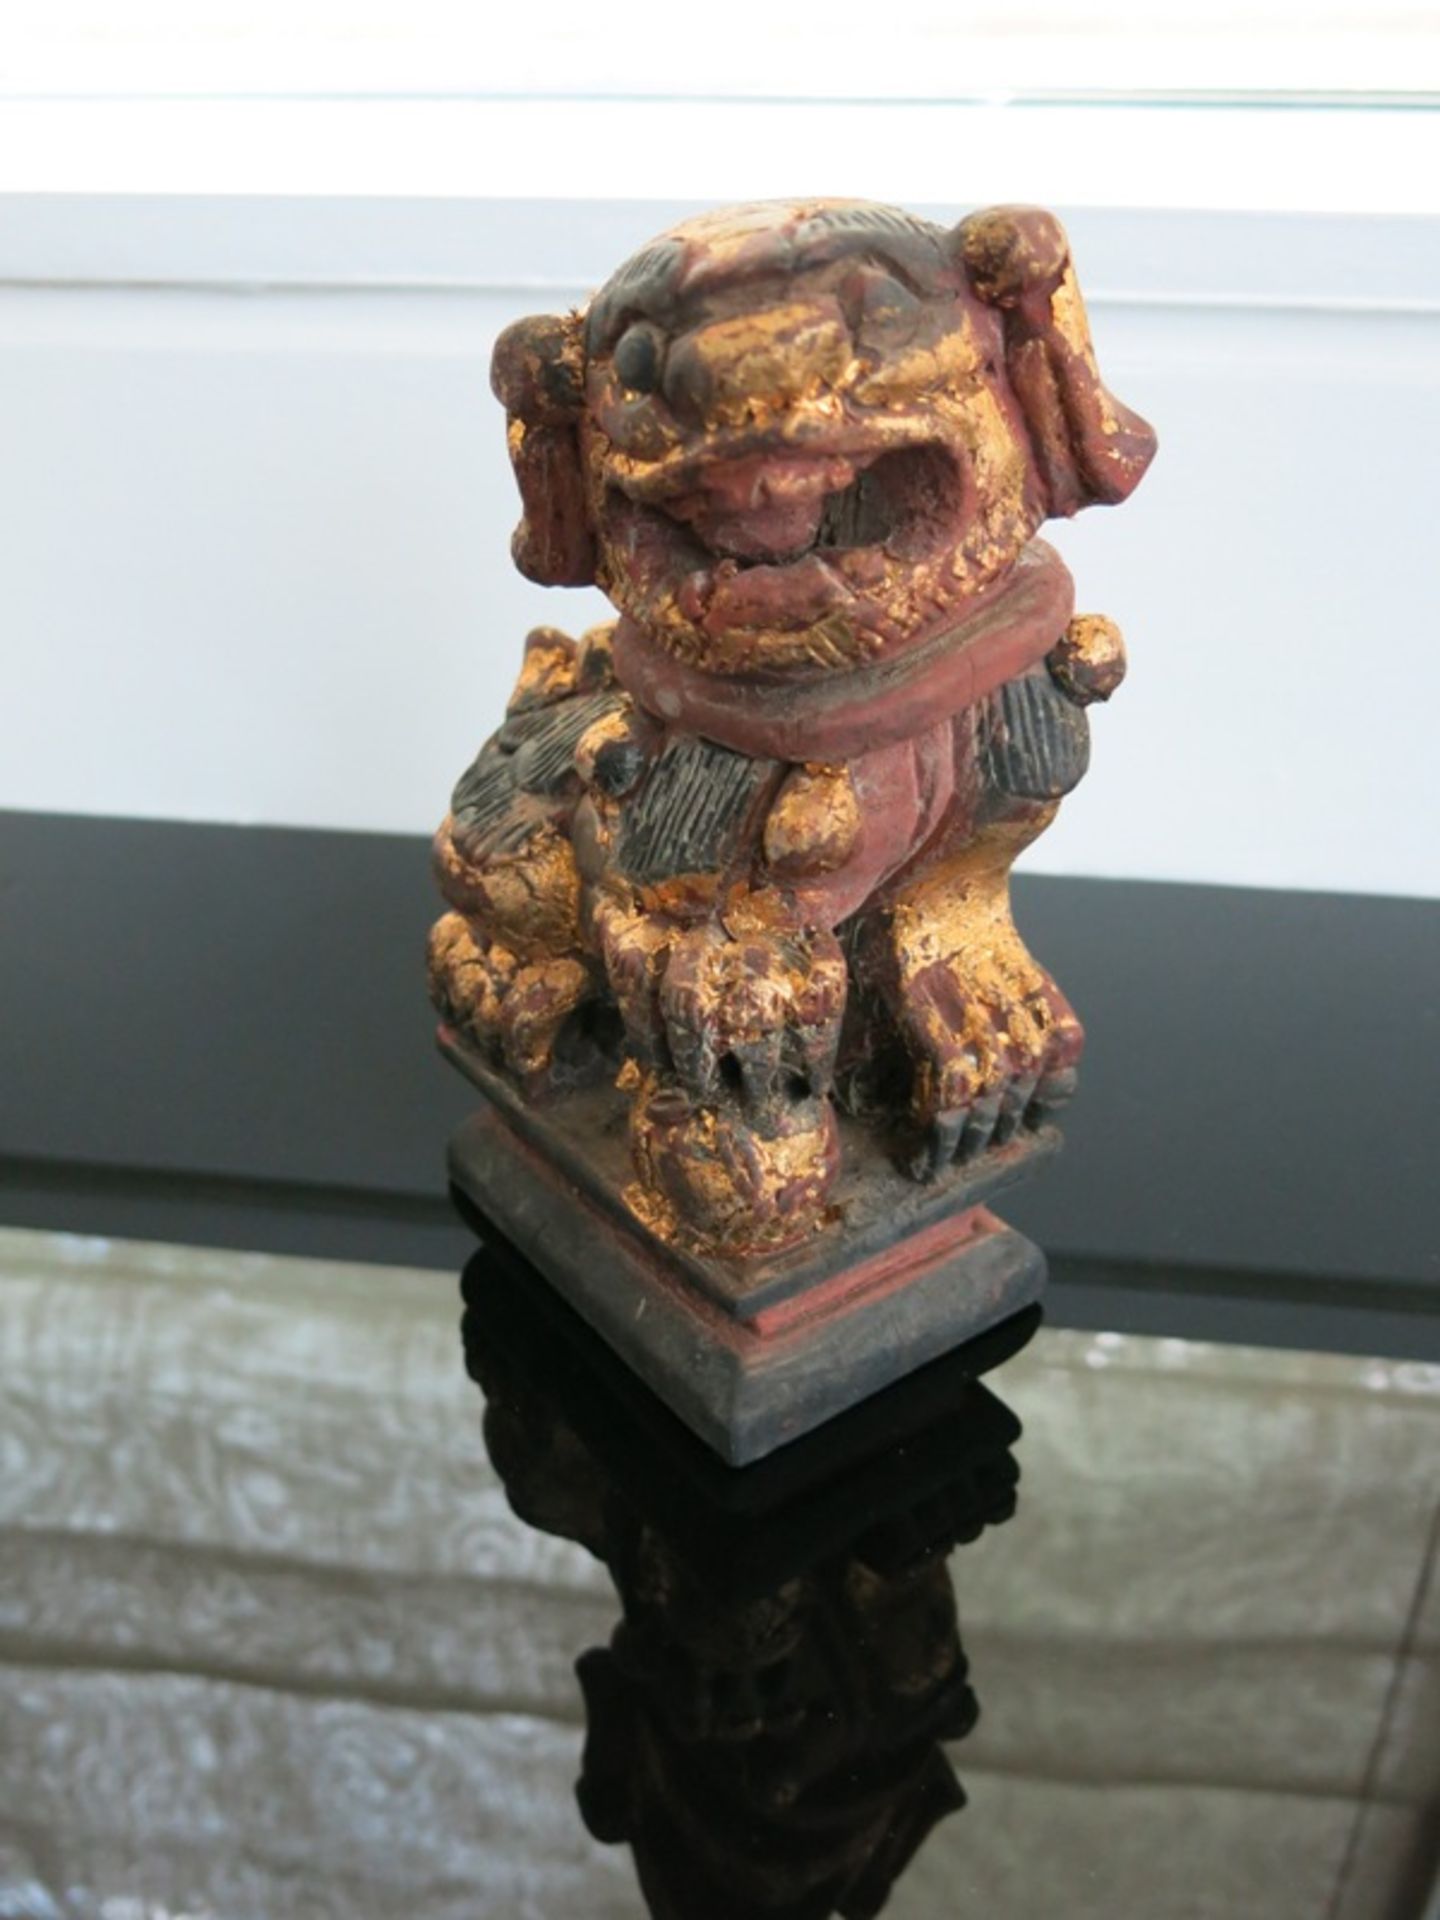 Pair of Wooden Chinese Ornamental Lions in Carved Wooden Box. "Chinese Good Luck Gift" - Image 3 of 9